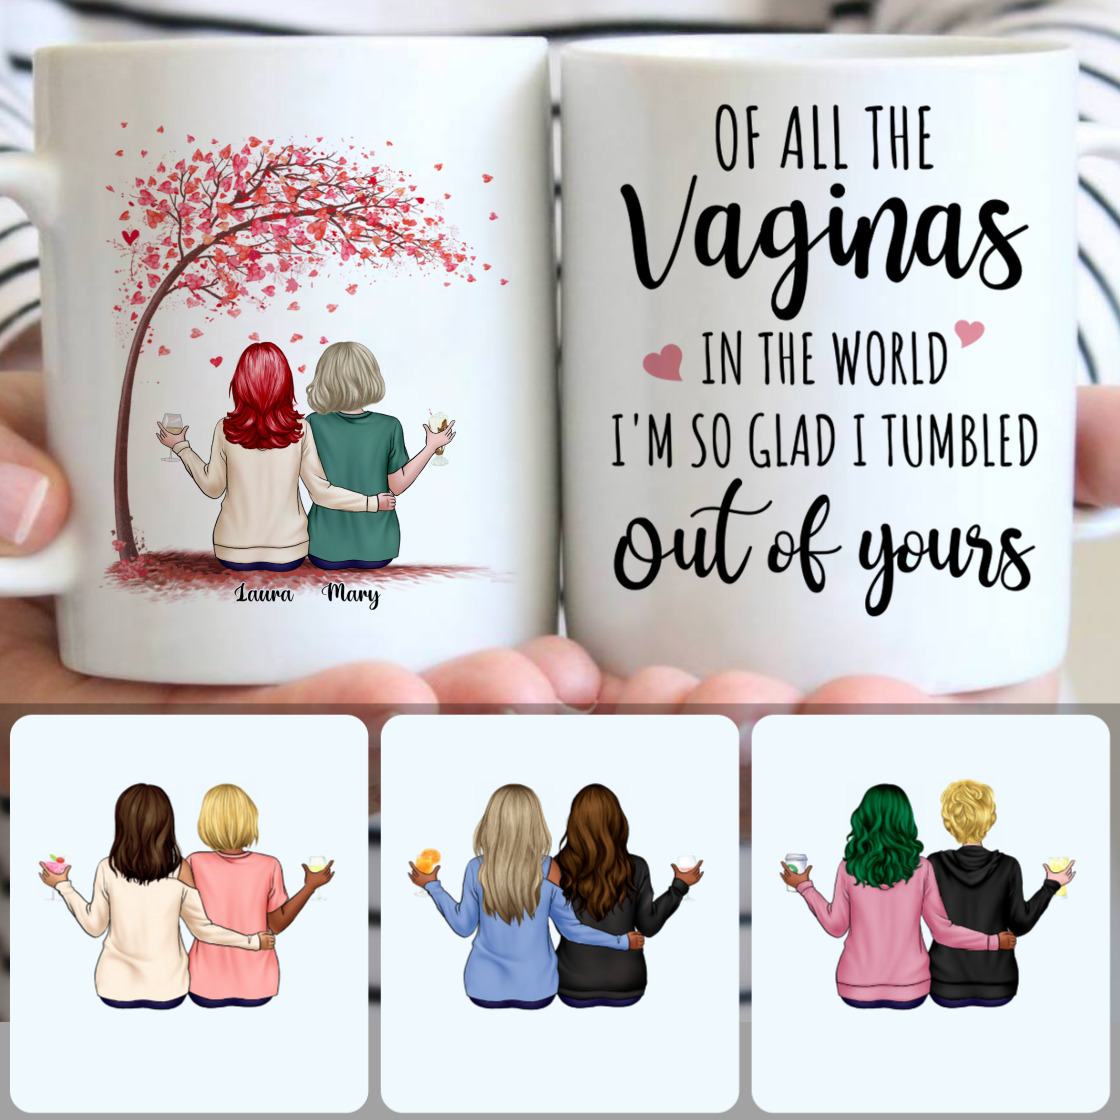 Personalized Mug, Special Gifts For Daughters, Mother & Daughter Customized Coffee Mug With Names